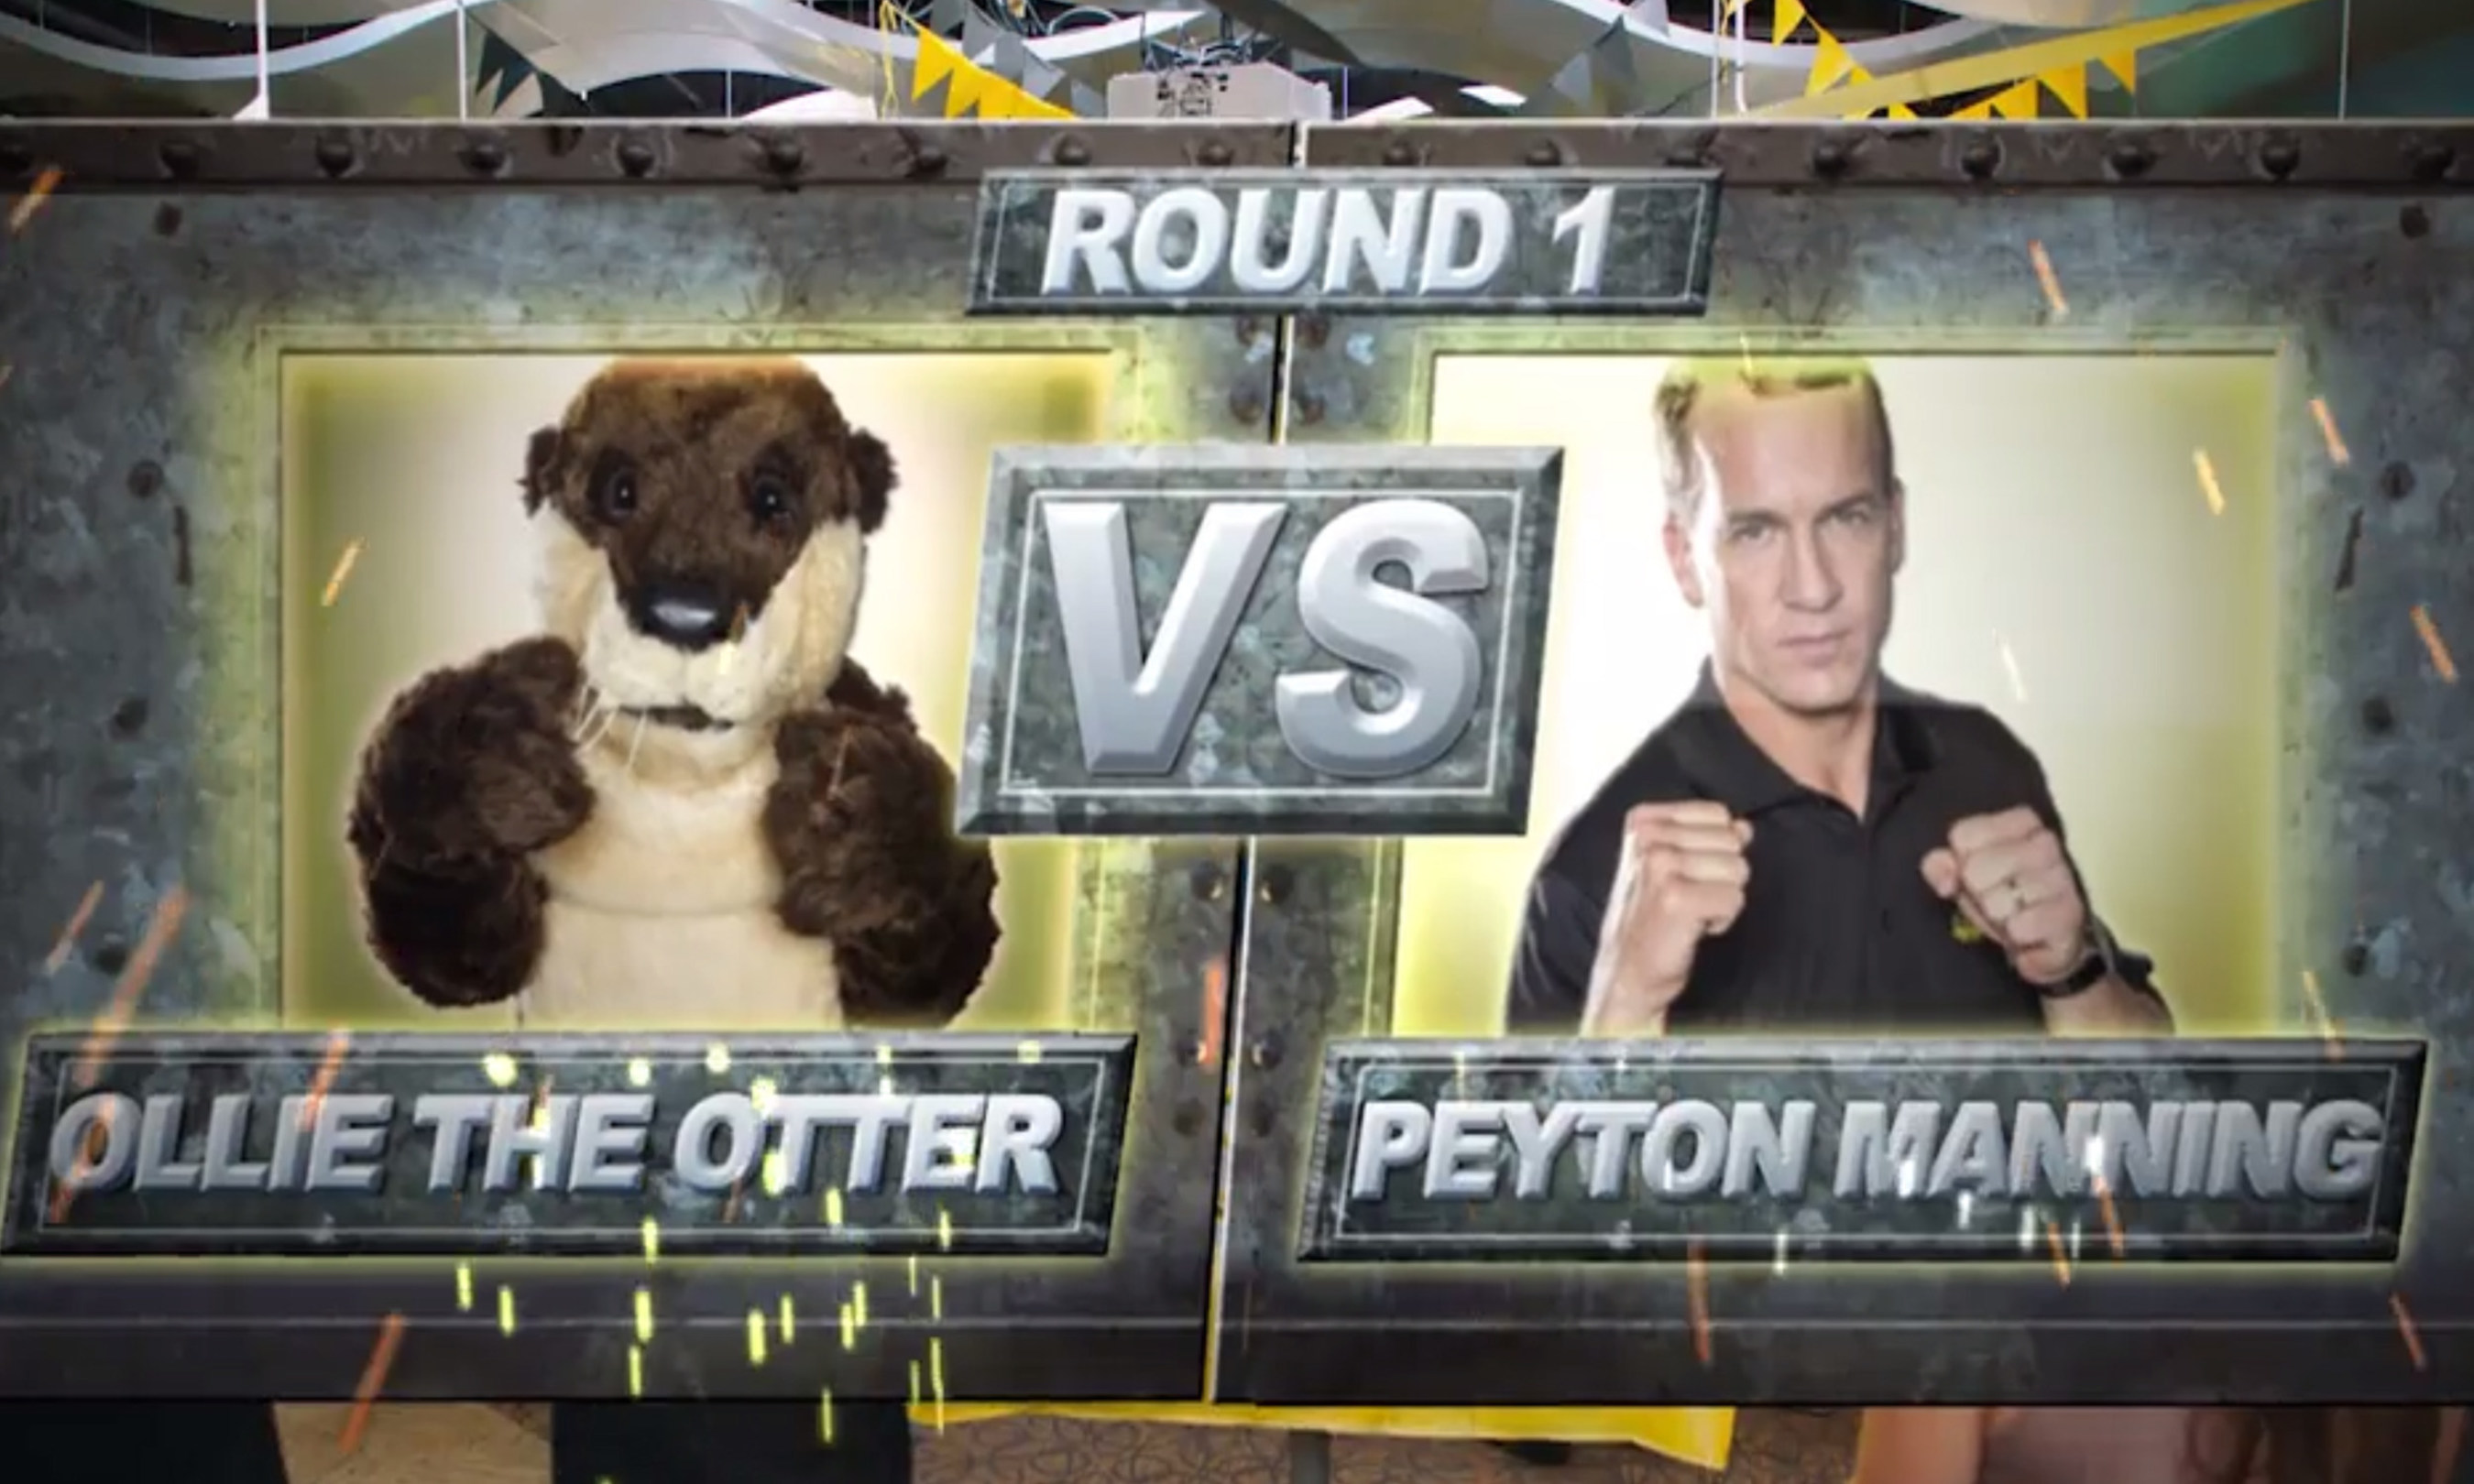 Former quarterback, Peyton Manning goes head to head with former spokesperson Ollie the Otter in a series of ads airing on ESPN Sept. 16 through Oct. 31